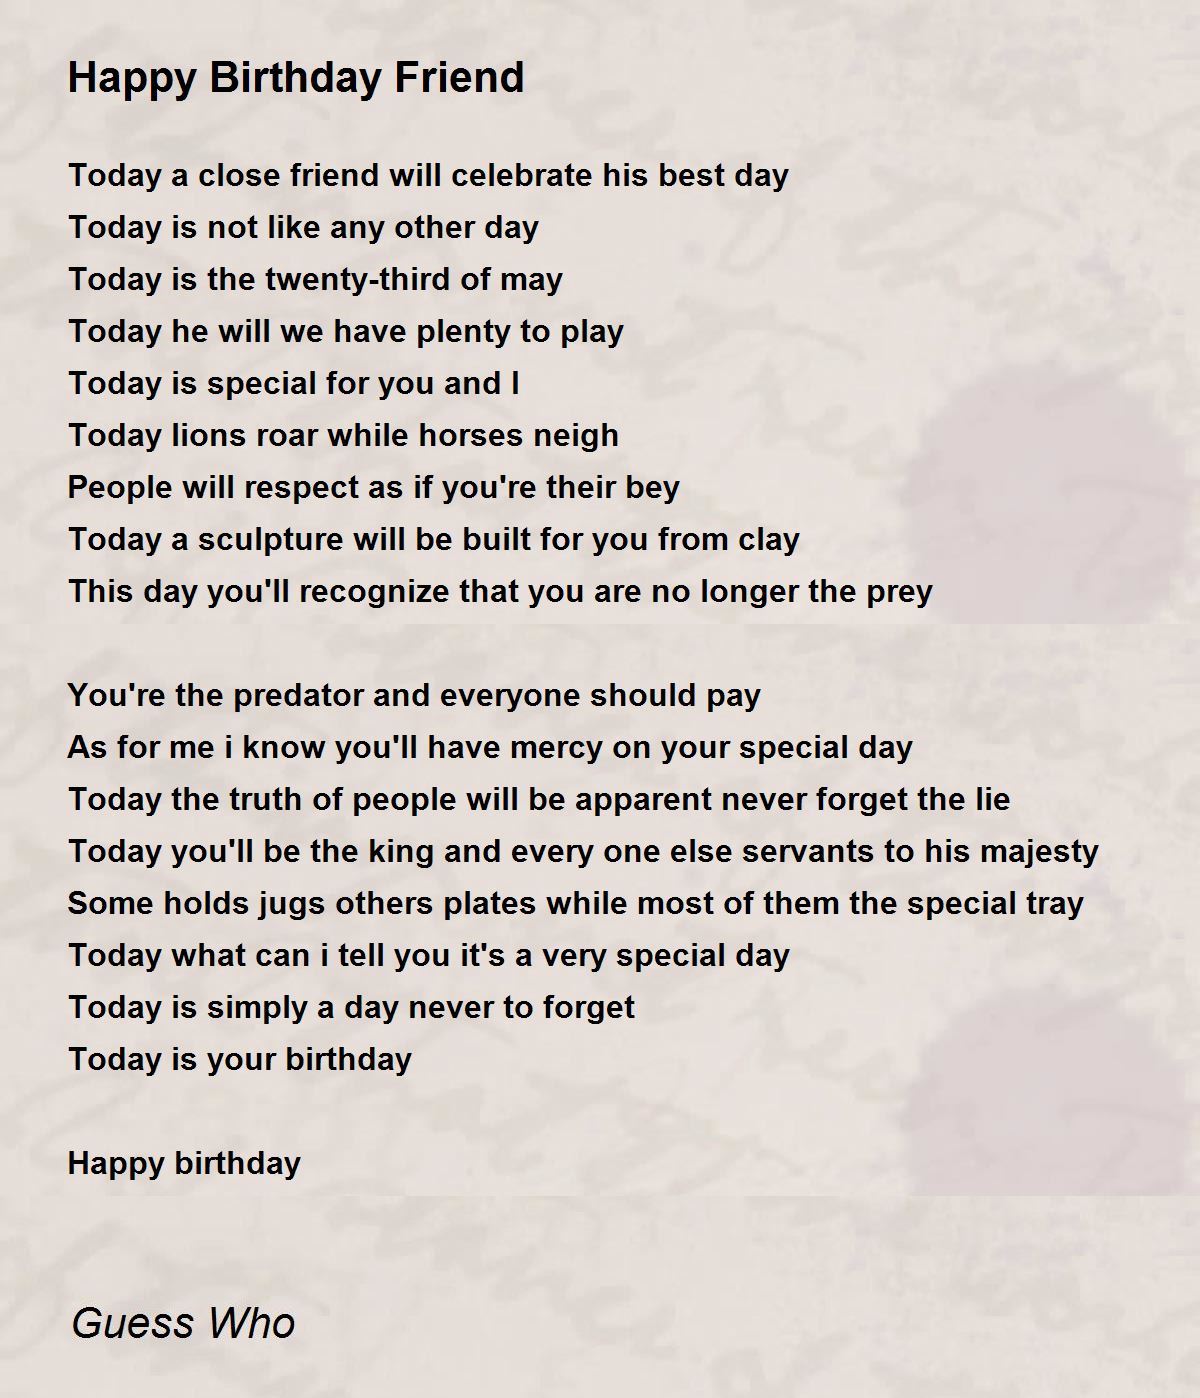 Happy Birthday Friend - Happy Birthday Friend Poem by Guess Who